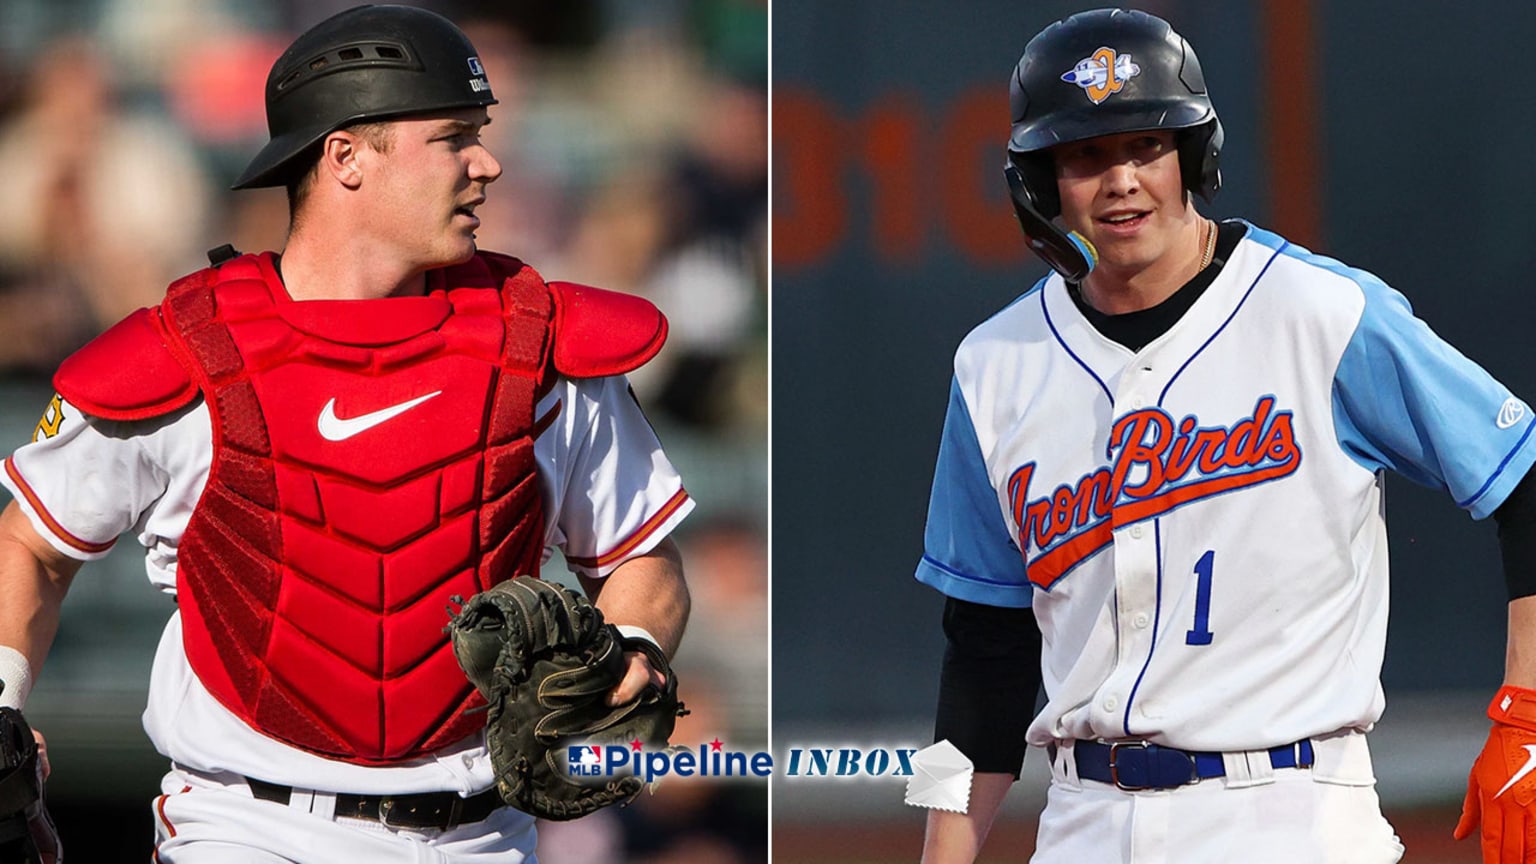 A split image showing two prospects, one a catcher, the other a baserunner